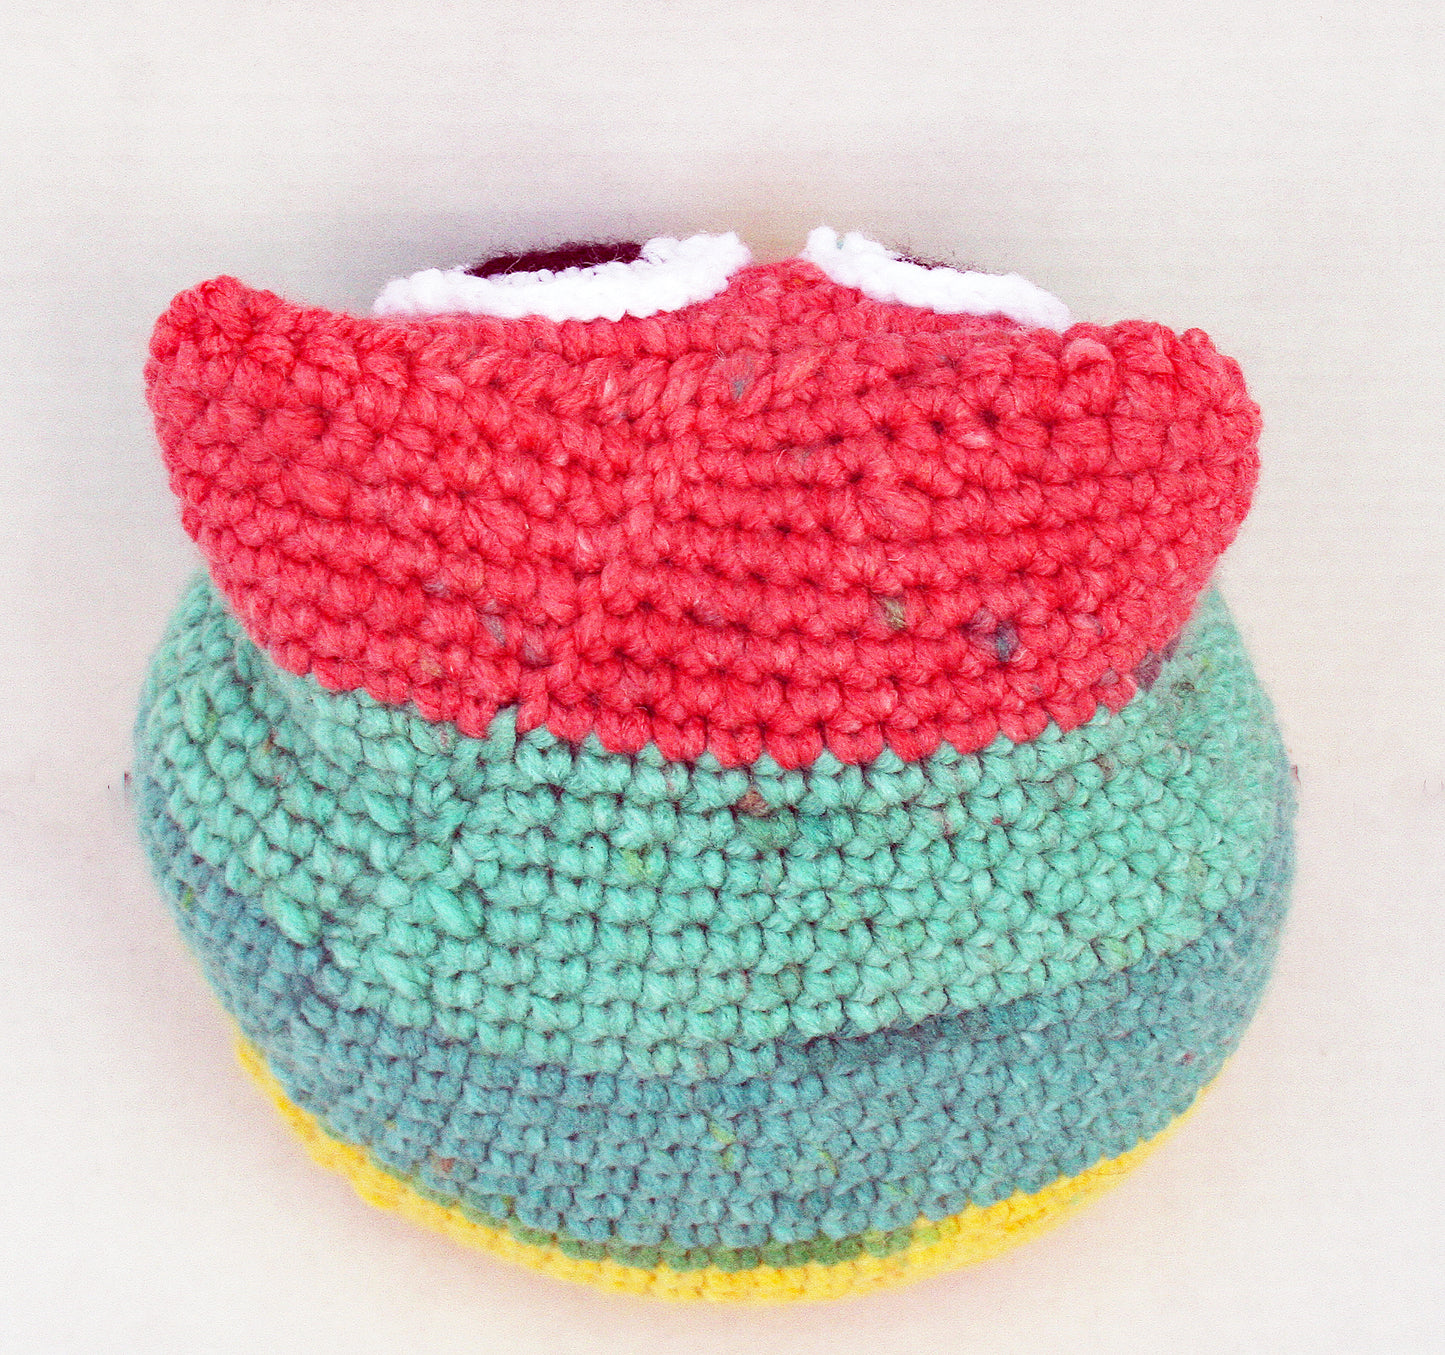 Crocheted Baby Gifts